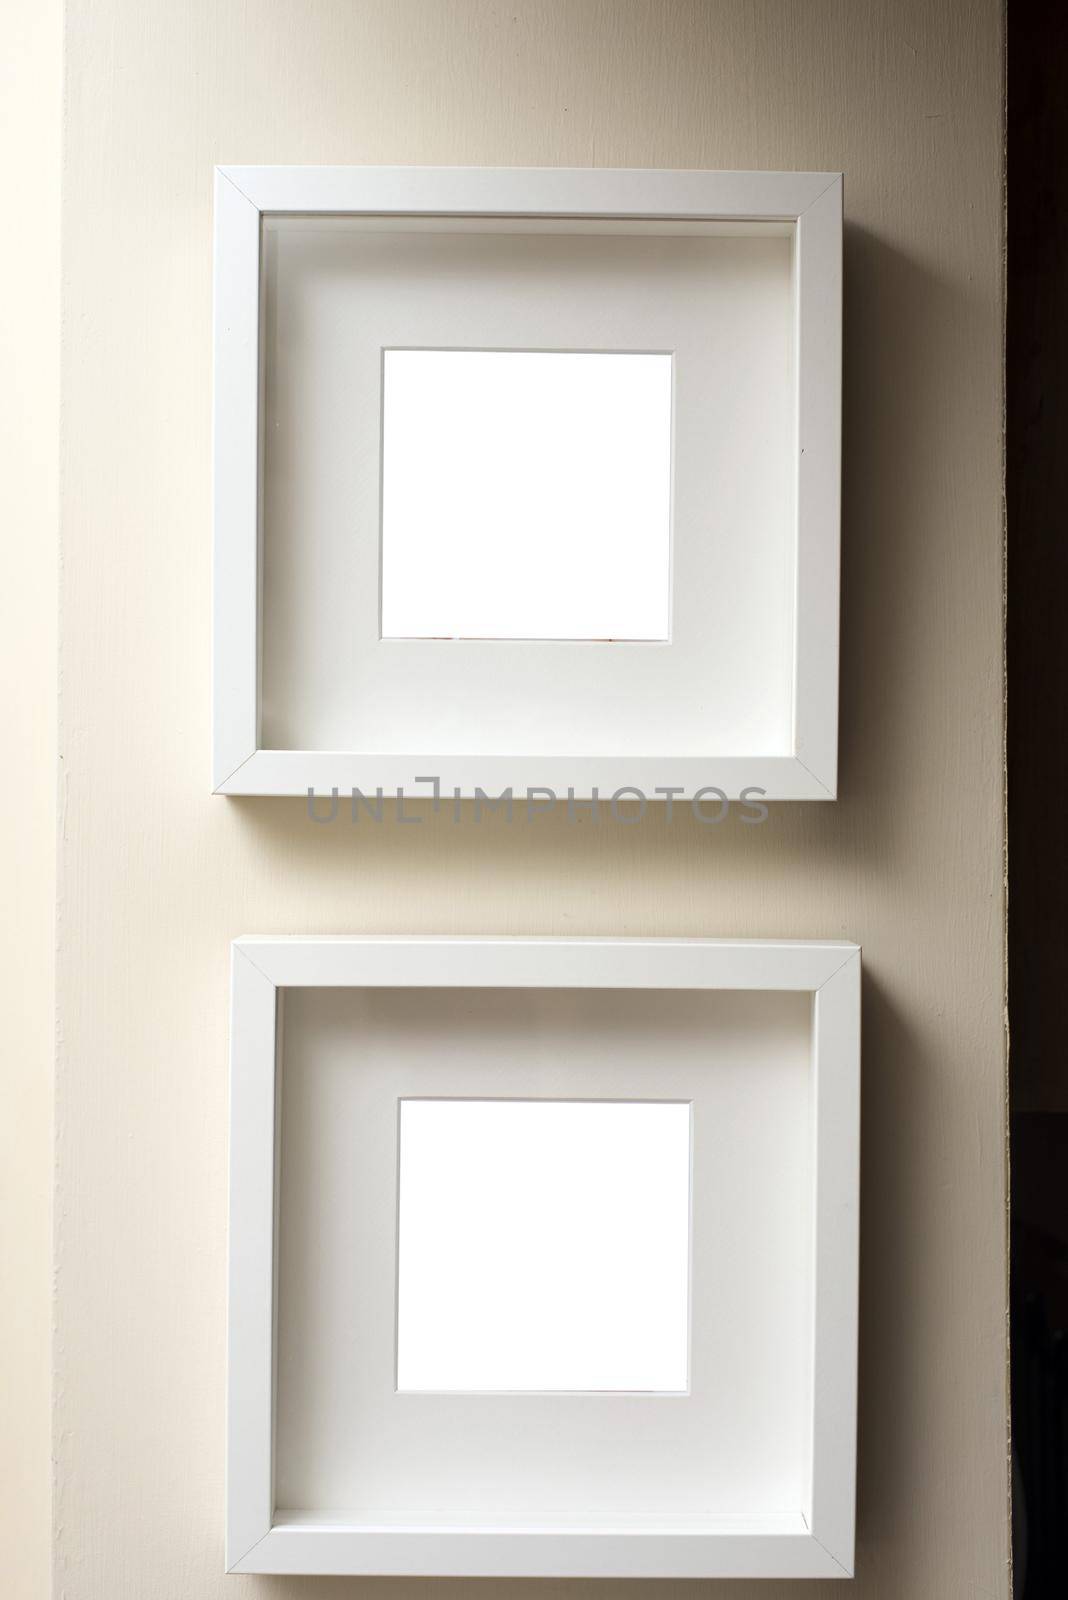 Two empty square neutral colored frames hanging together on an off white wall one below the other